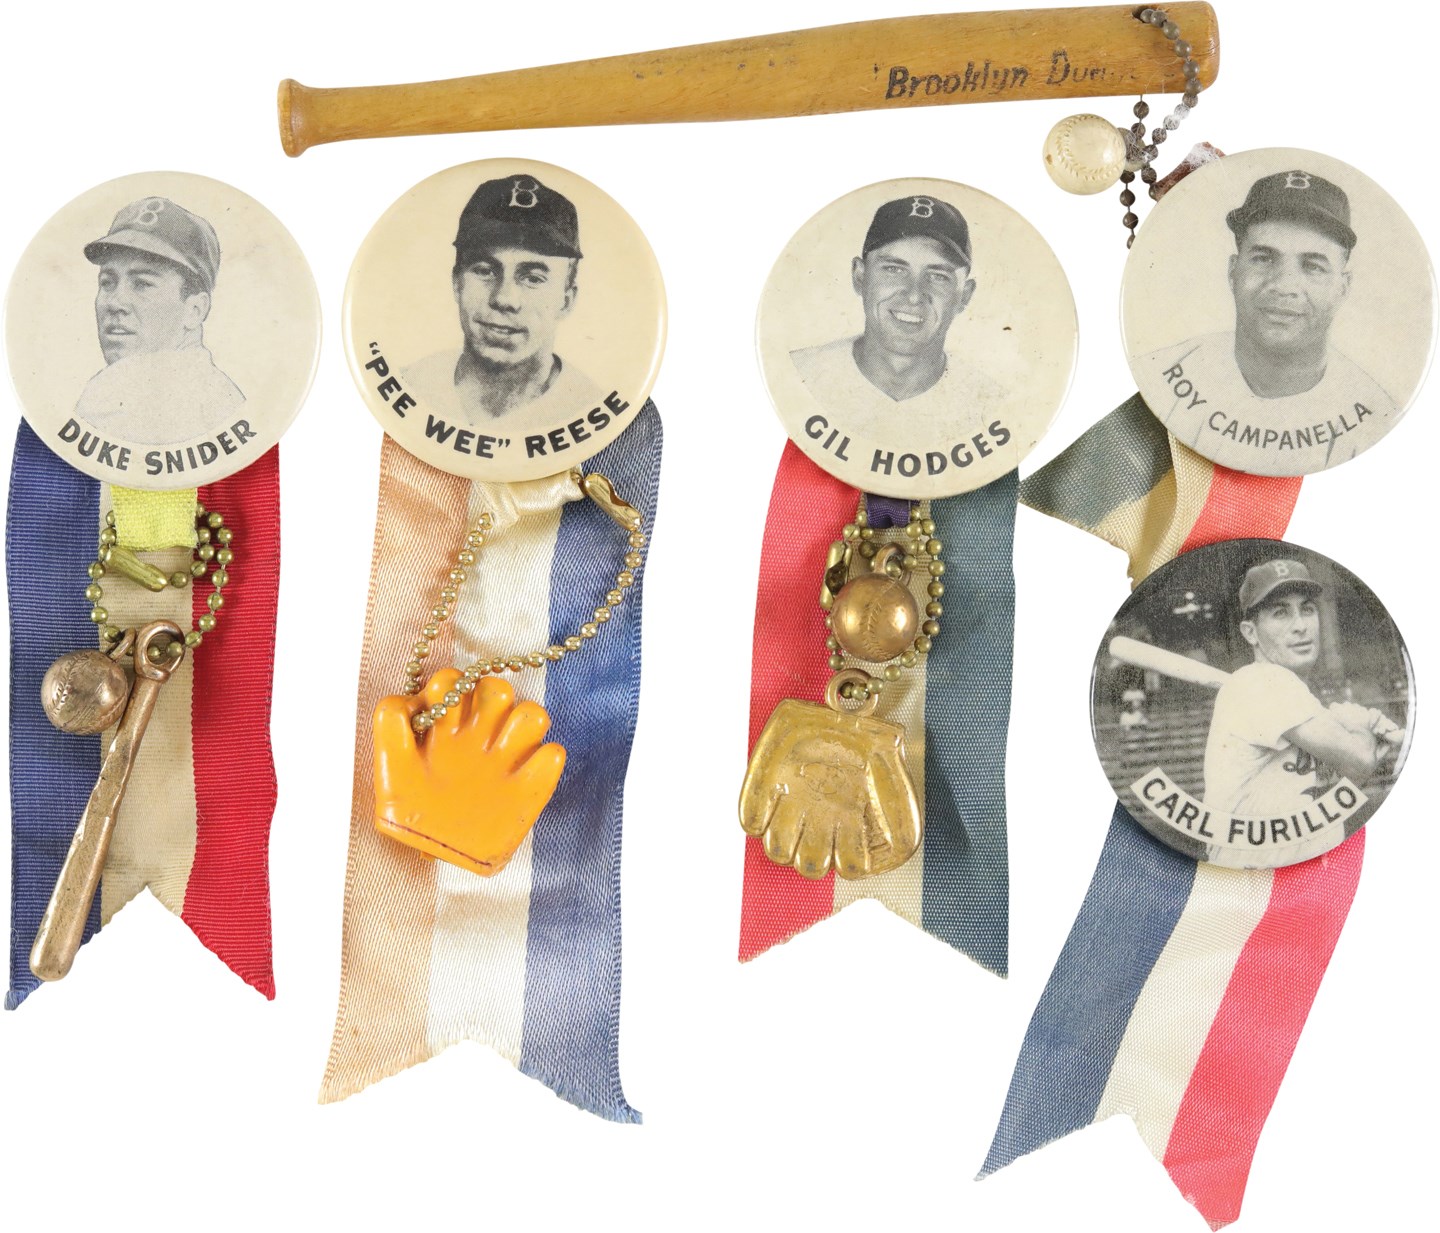 - Vintage Brooklyn Dodgers Player Pin Collection (14) - All with Ribbons